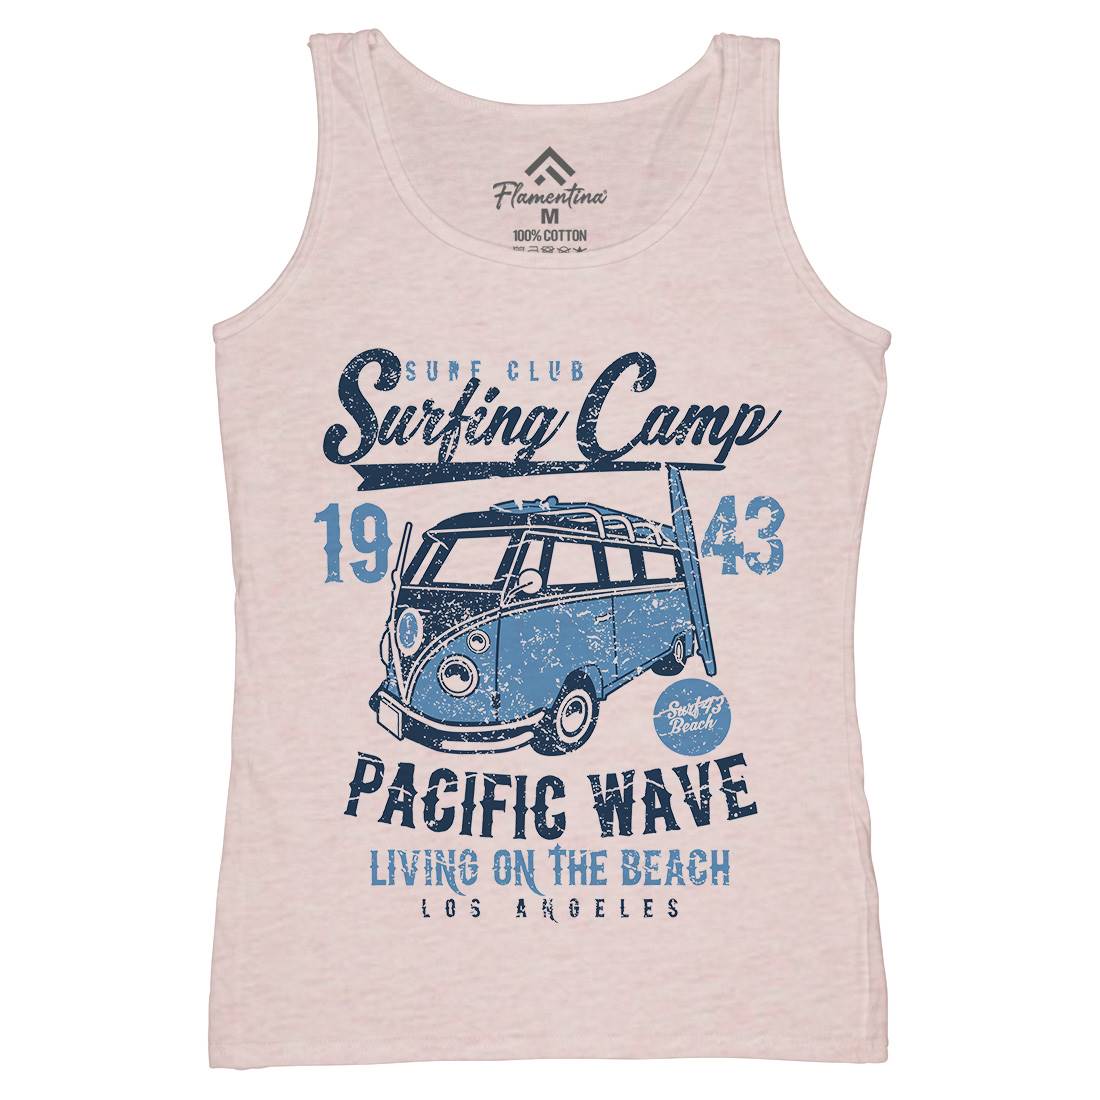 Surfing Camp Womens Organic Tank Top Vest Surf A170